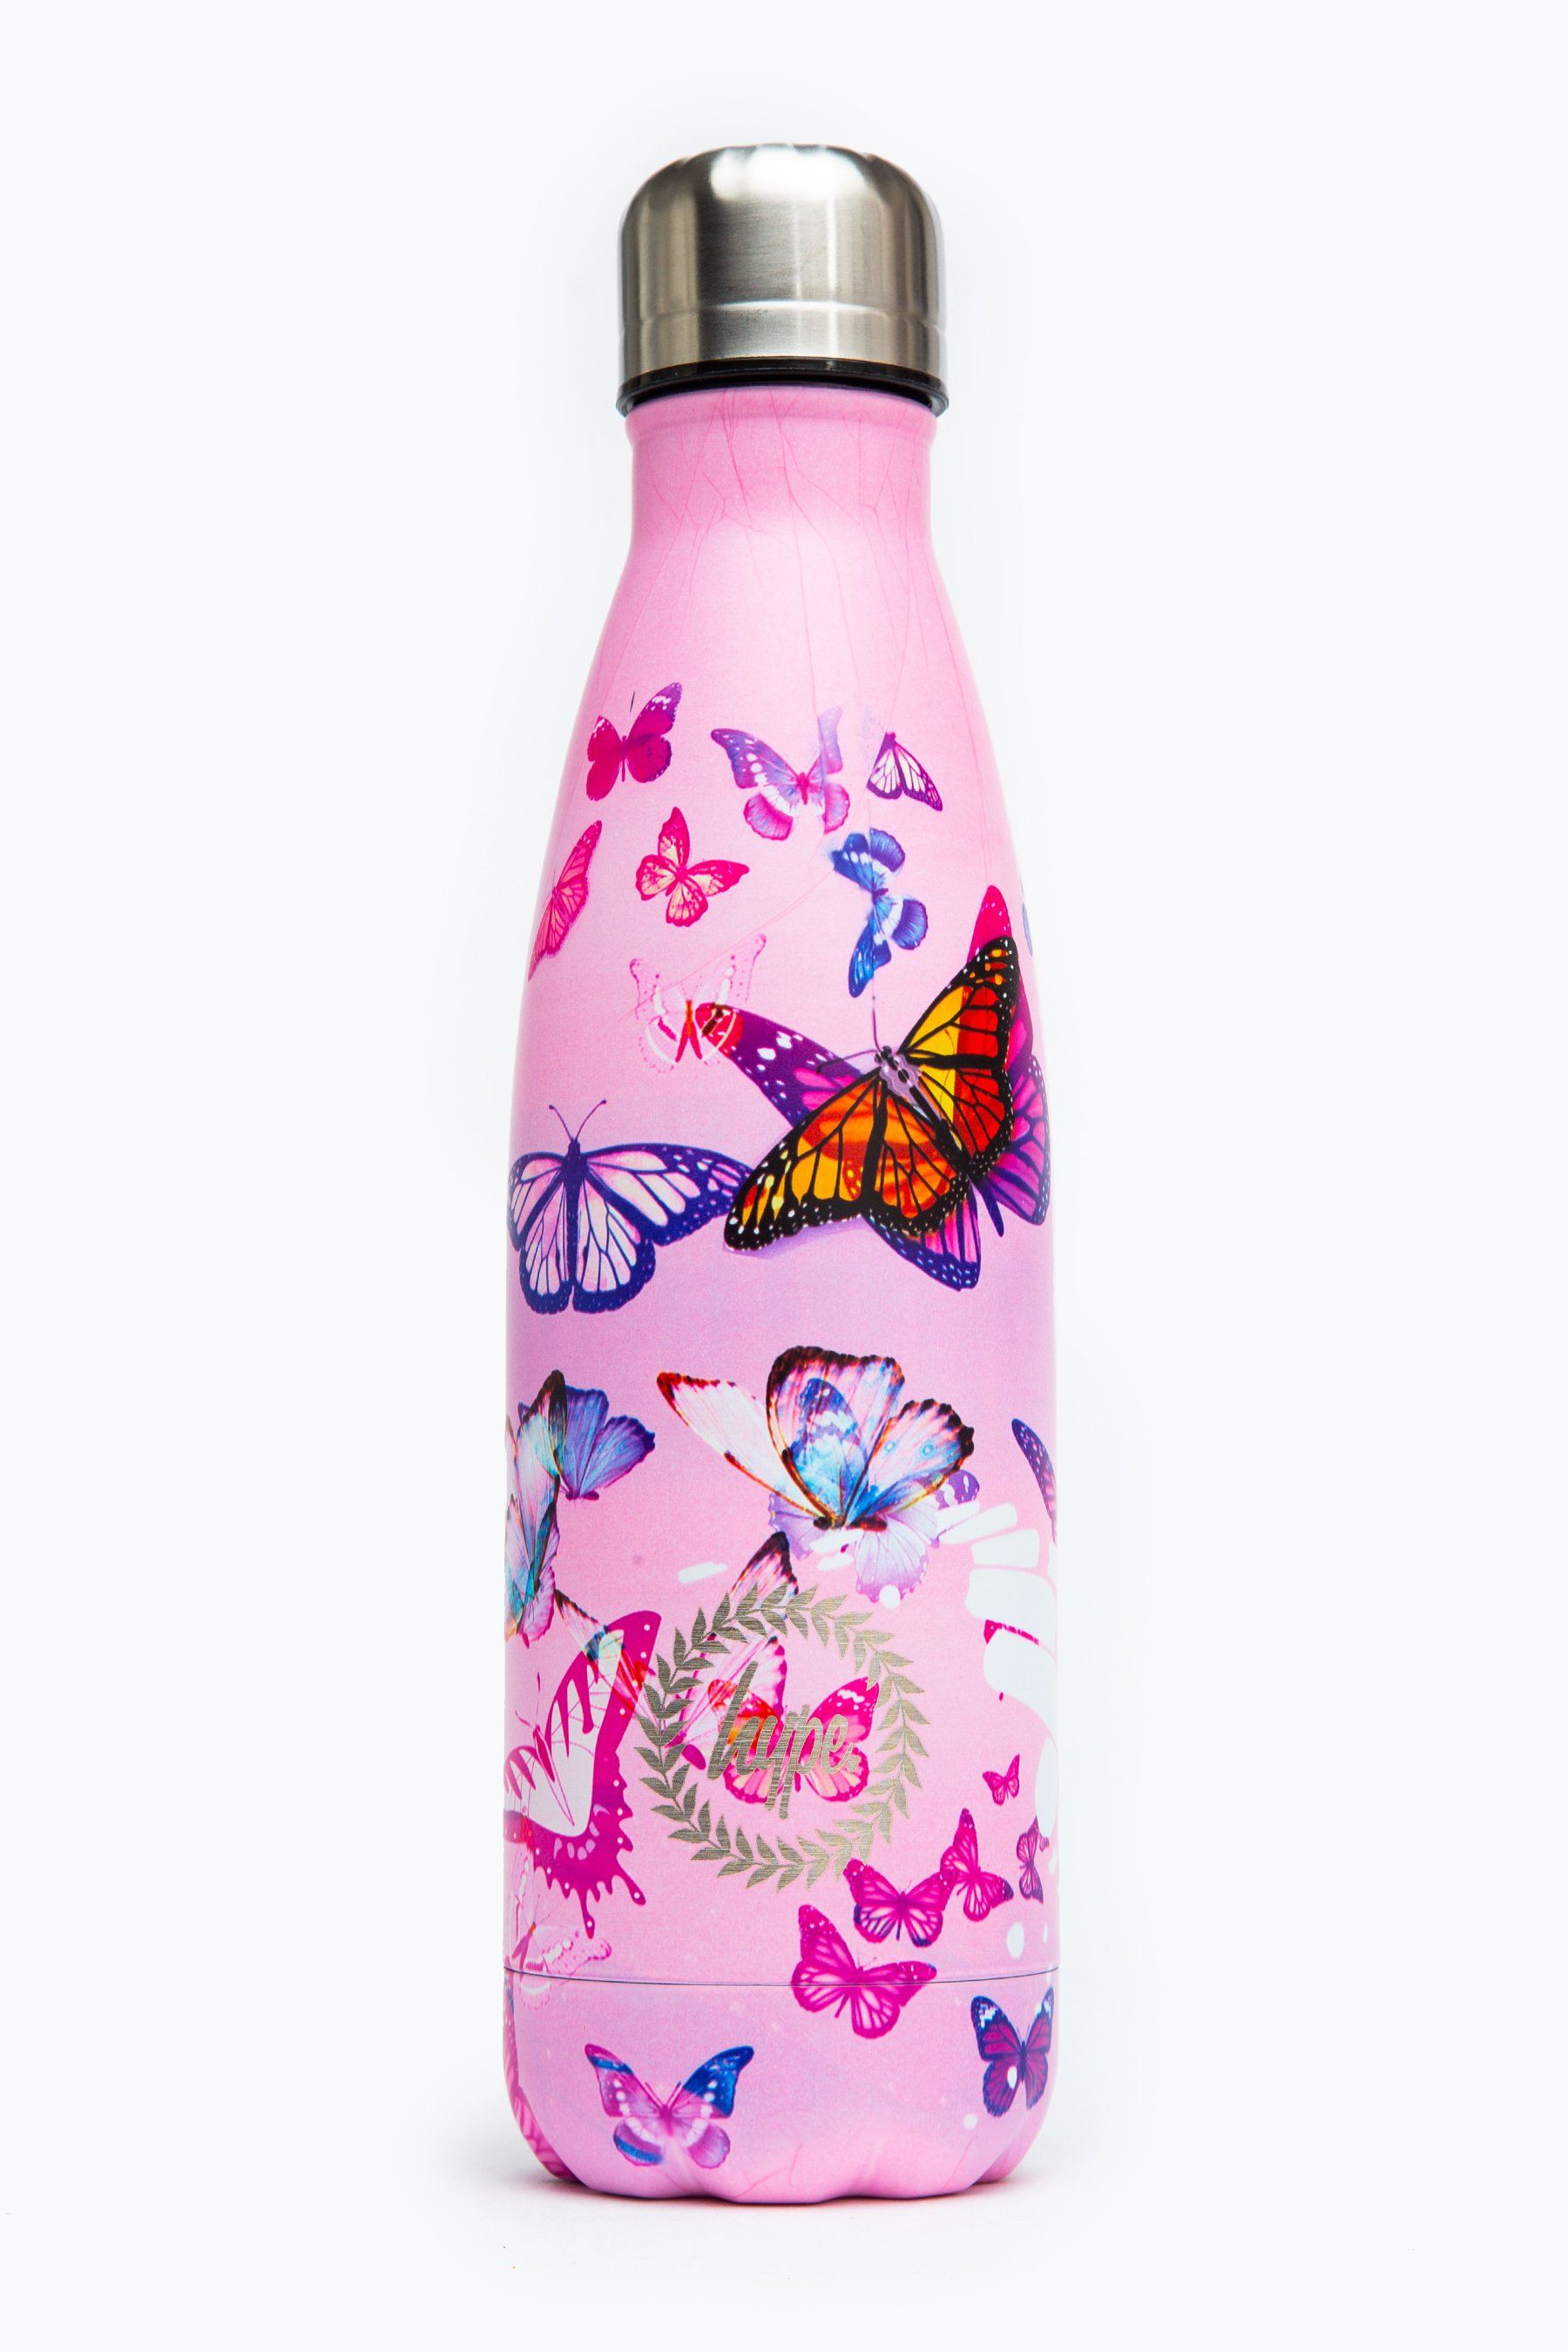 Meet the HYPE. Pink Butterflies Metal Reusable Bottle, perfect for when you're on the go. Designed in Aluminium to ensure your water stays ice-cold and for chillier days, keeping your oat milk latte warm for longer. The design features a pastel pink base with an all-over butterfly overlay in a contrasting pink, purple and peach colour palette. Finished with the iconic HYPE. crest logo in white on the front. Why not grab one of our lunch bags or backpacks with a bottle holder to complete the look, we suggest grabbing the matching set.